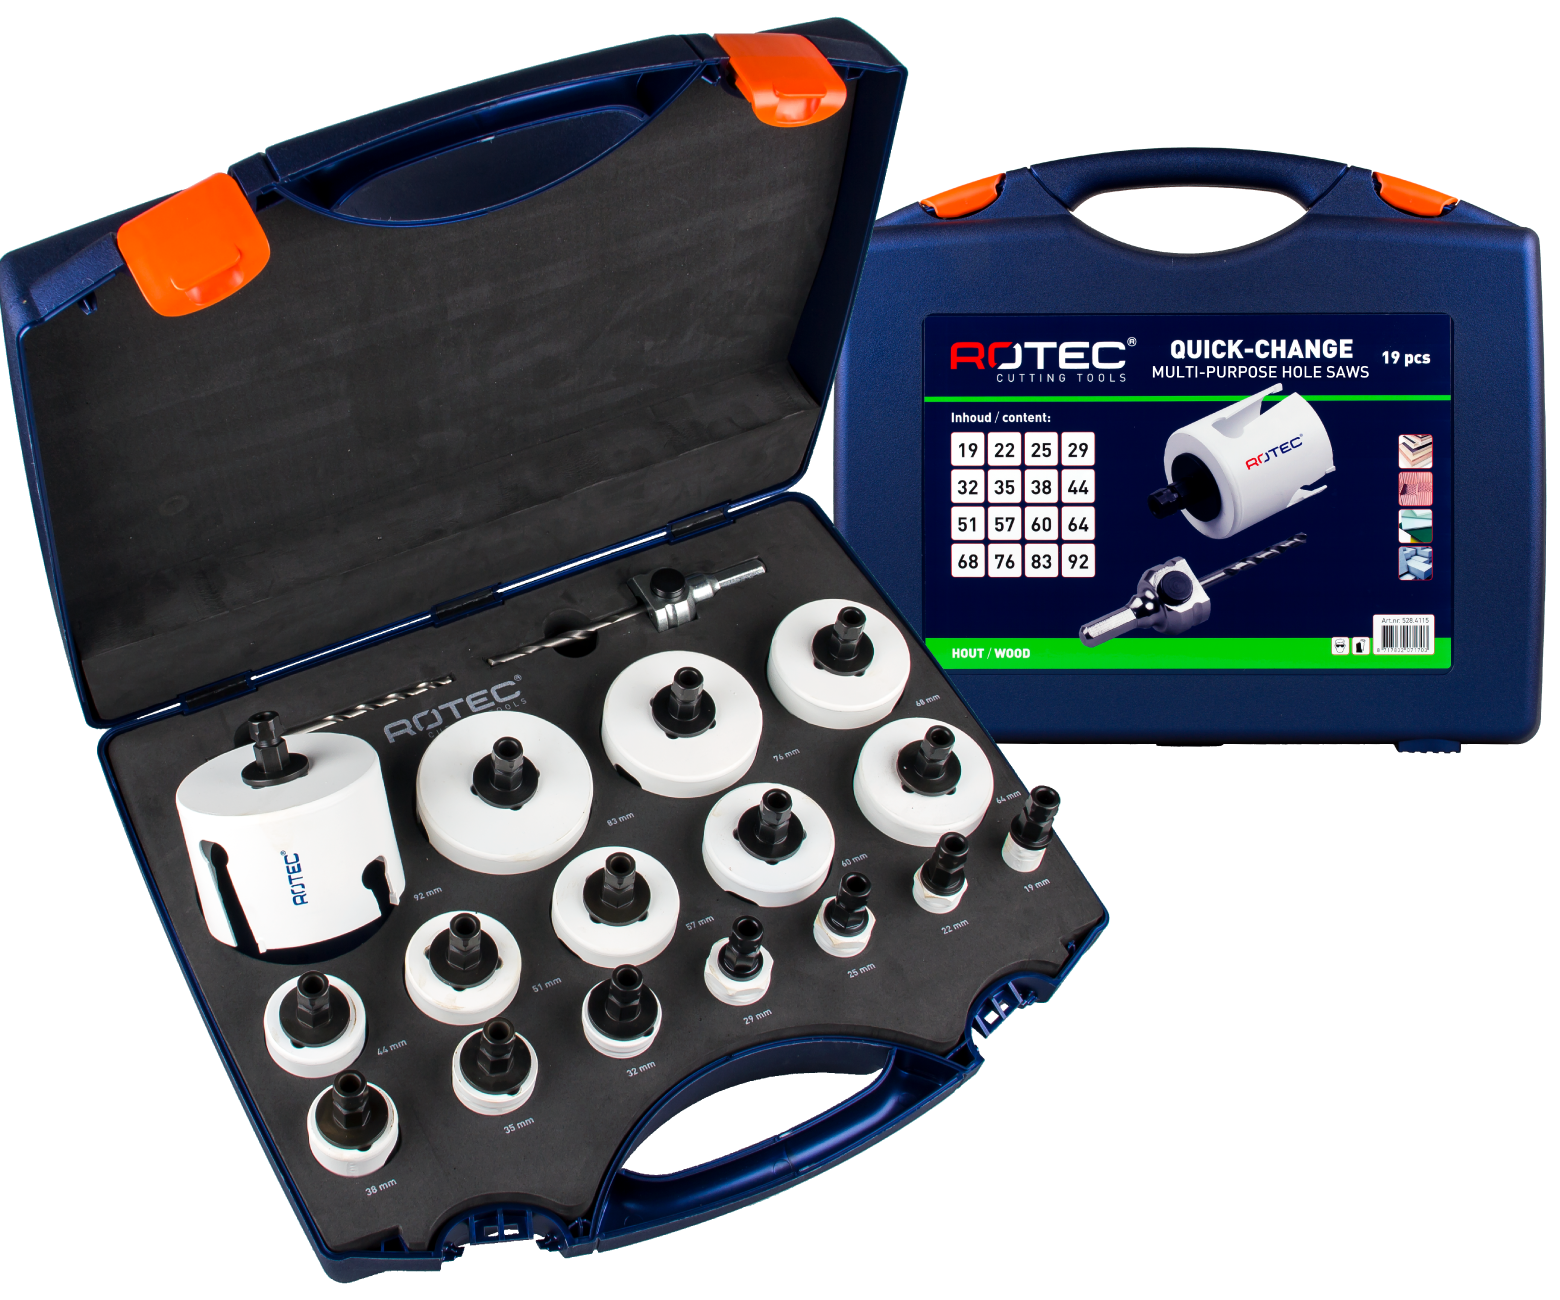 19 pc TCT Multi-Purpose hole saw set type '528 - MAX' with Quick-Change